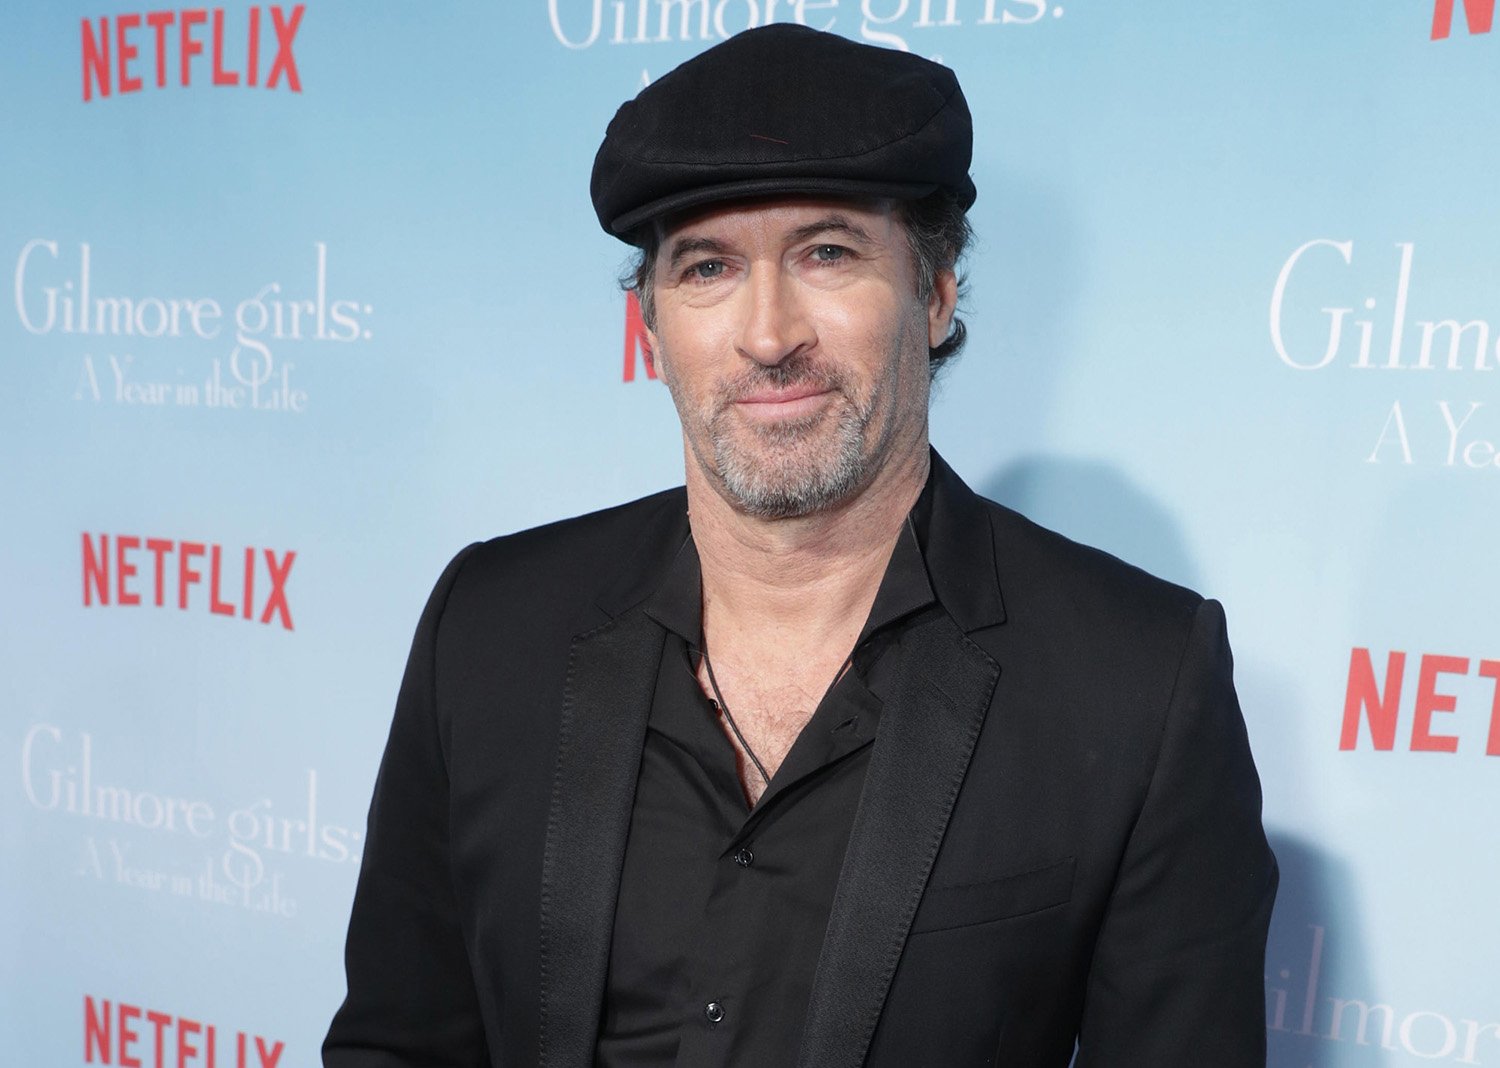 Luke Danes actor Scott Patterson attends the Gilmore Girls: A Year in the Life premiere